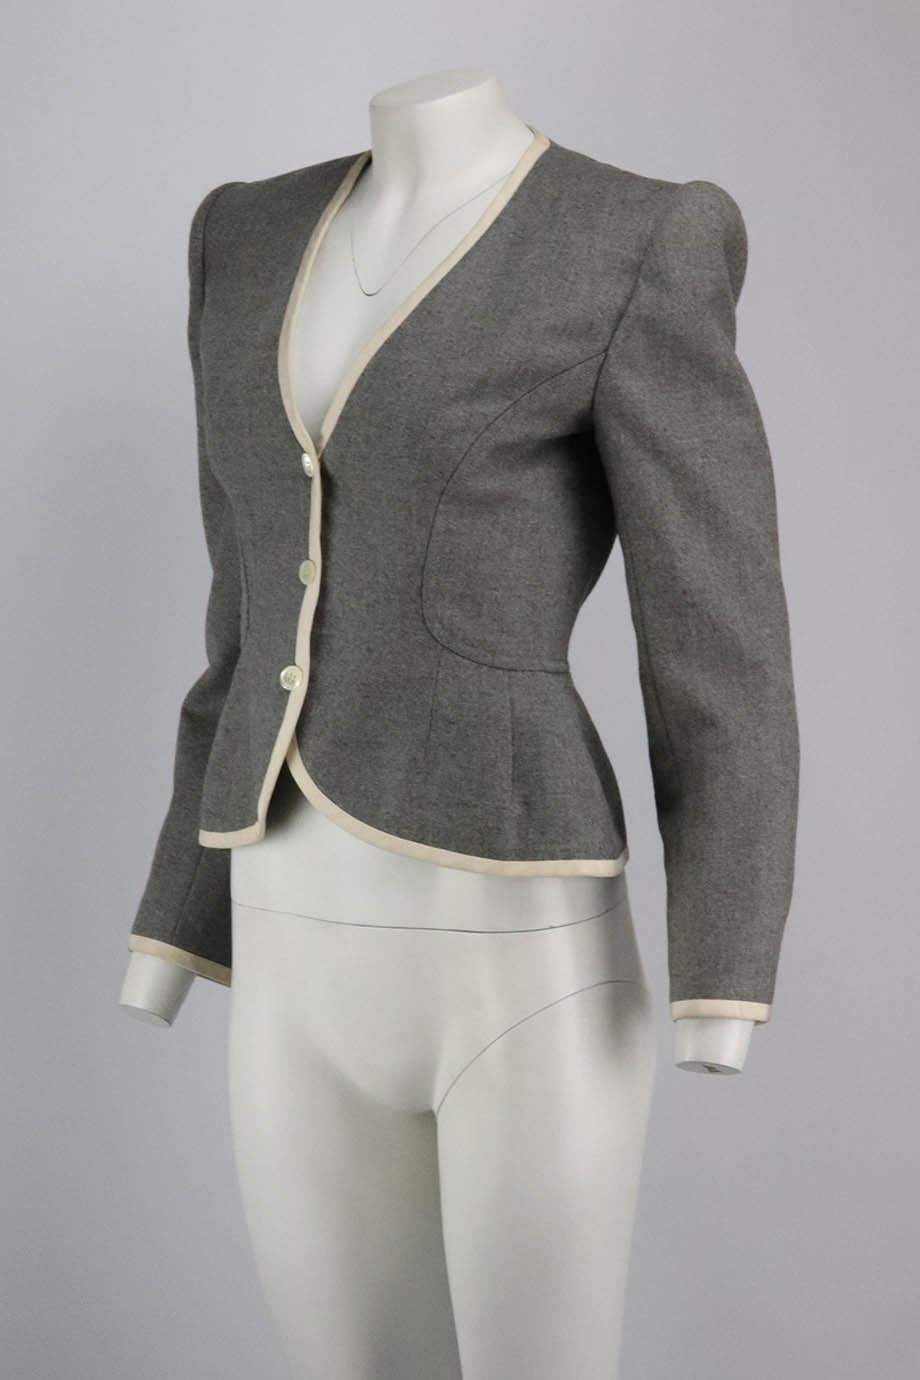 This blazer by Valentino Couture has been tailored in Italy from exceptionally soft wool and has strong padded shoulders and a sweeping v-neckline, trimmed in ivory grosgrain. Grey wool, ivory grosgrain. Button fastening at front. Size: Small (UK 8,